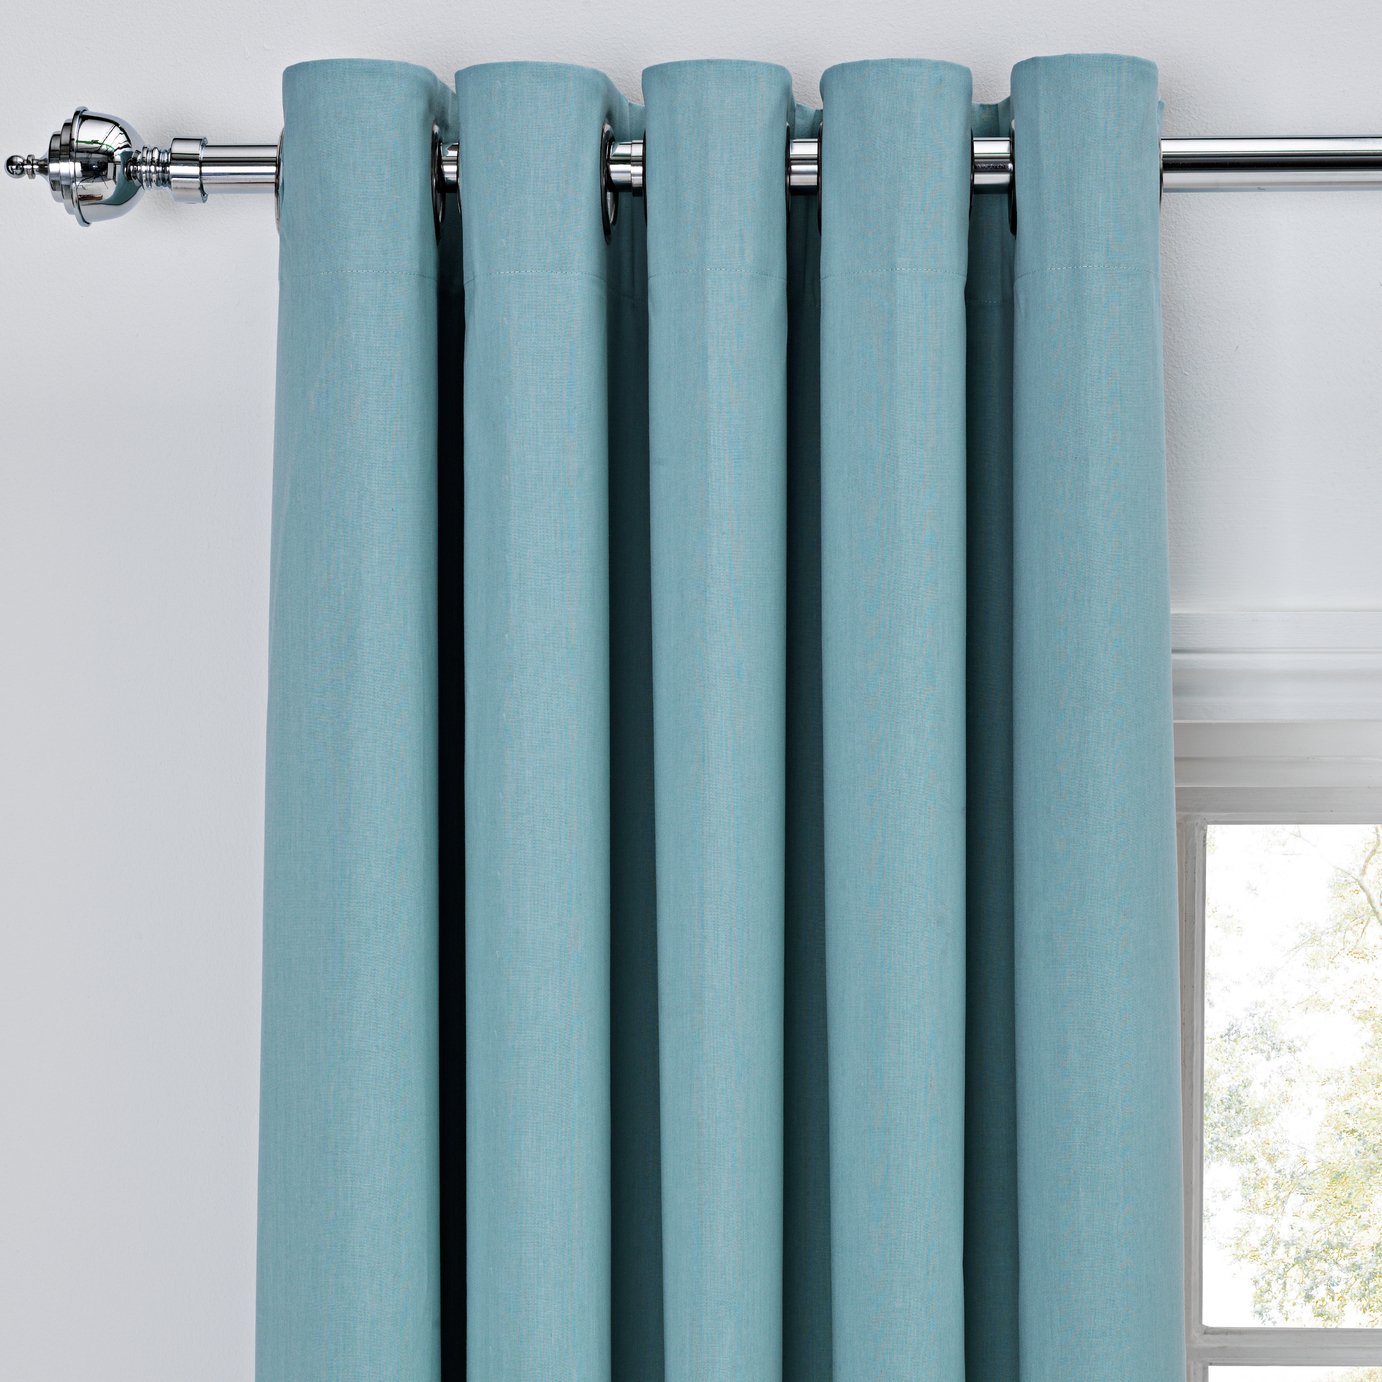 ColourMatch Thermal Blackout Curtains - 229x229cm - Duck Egg